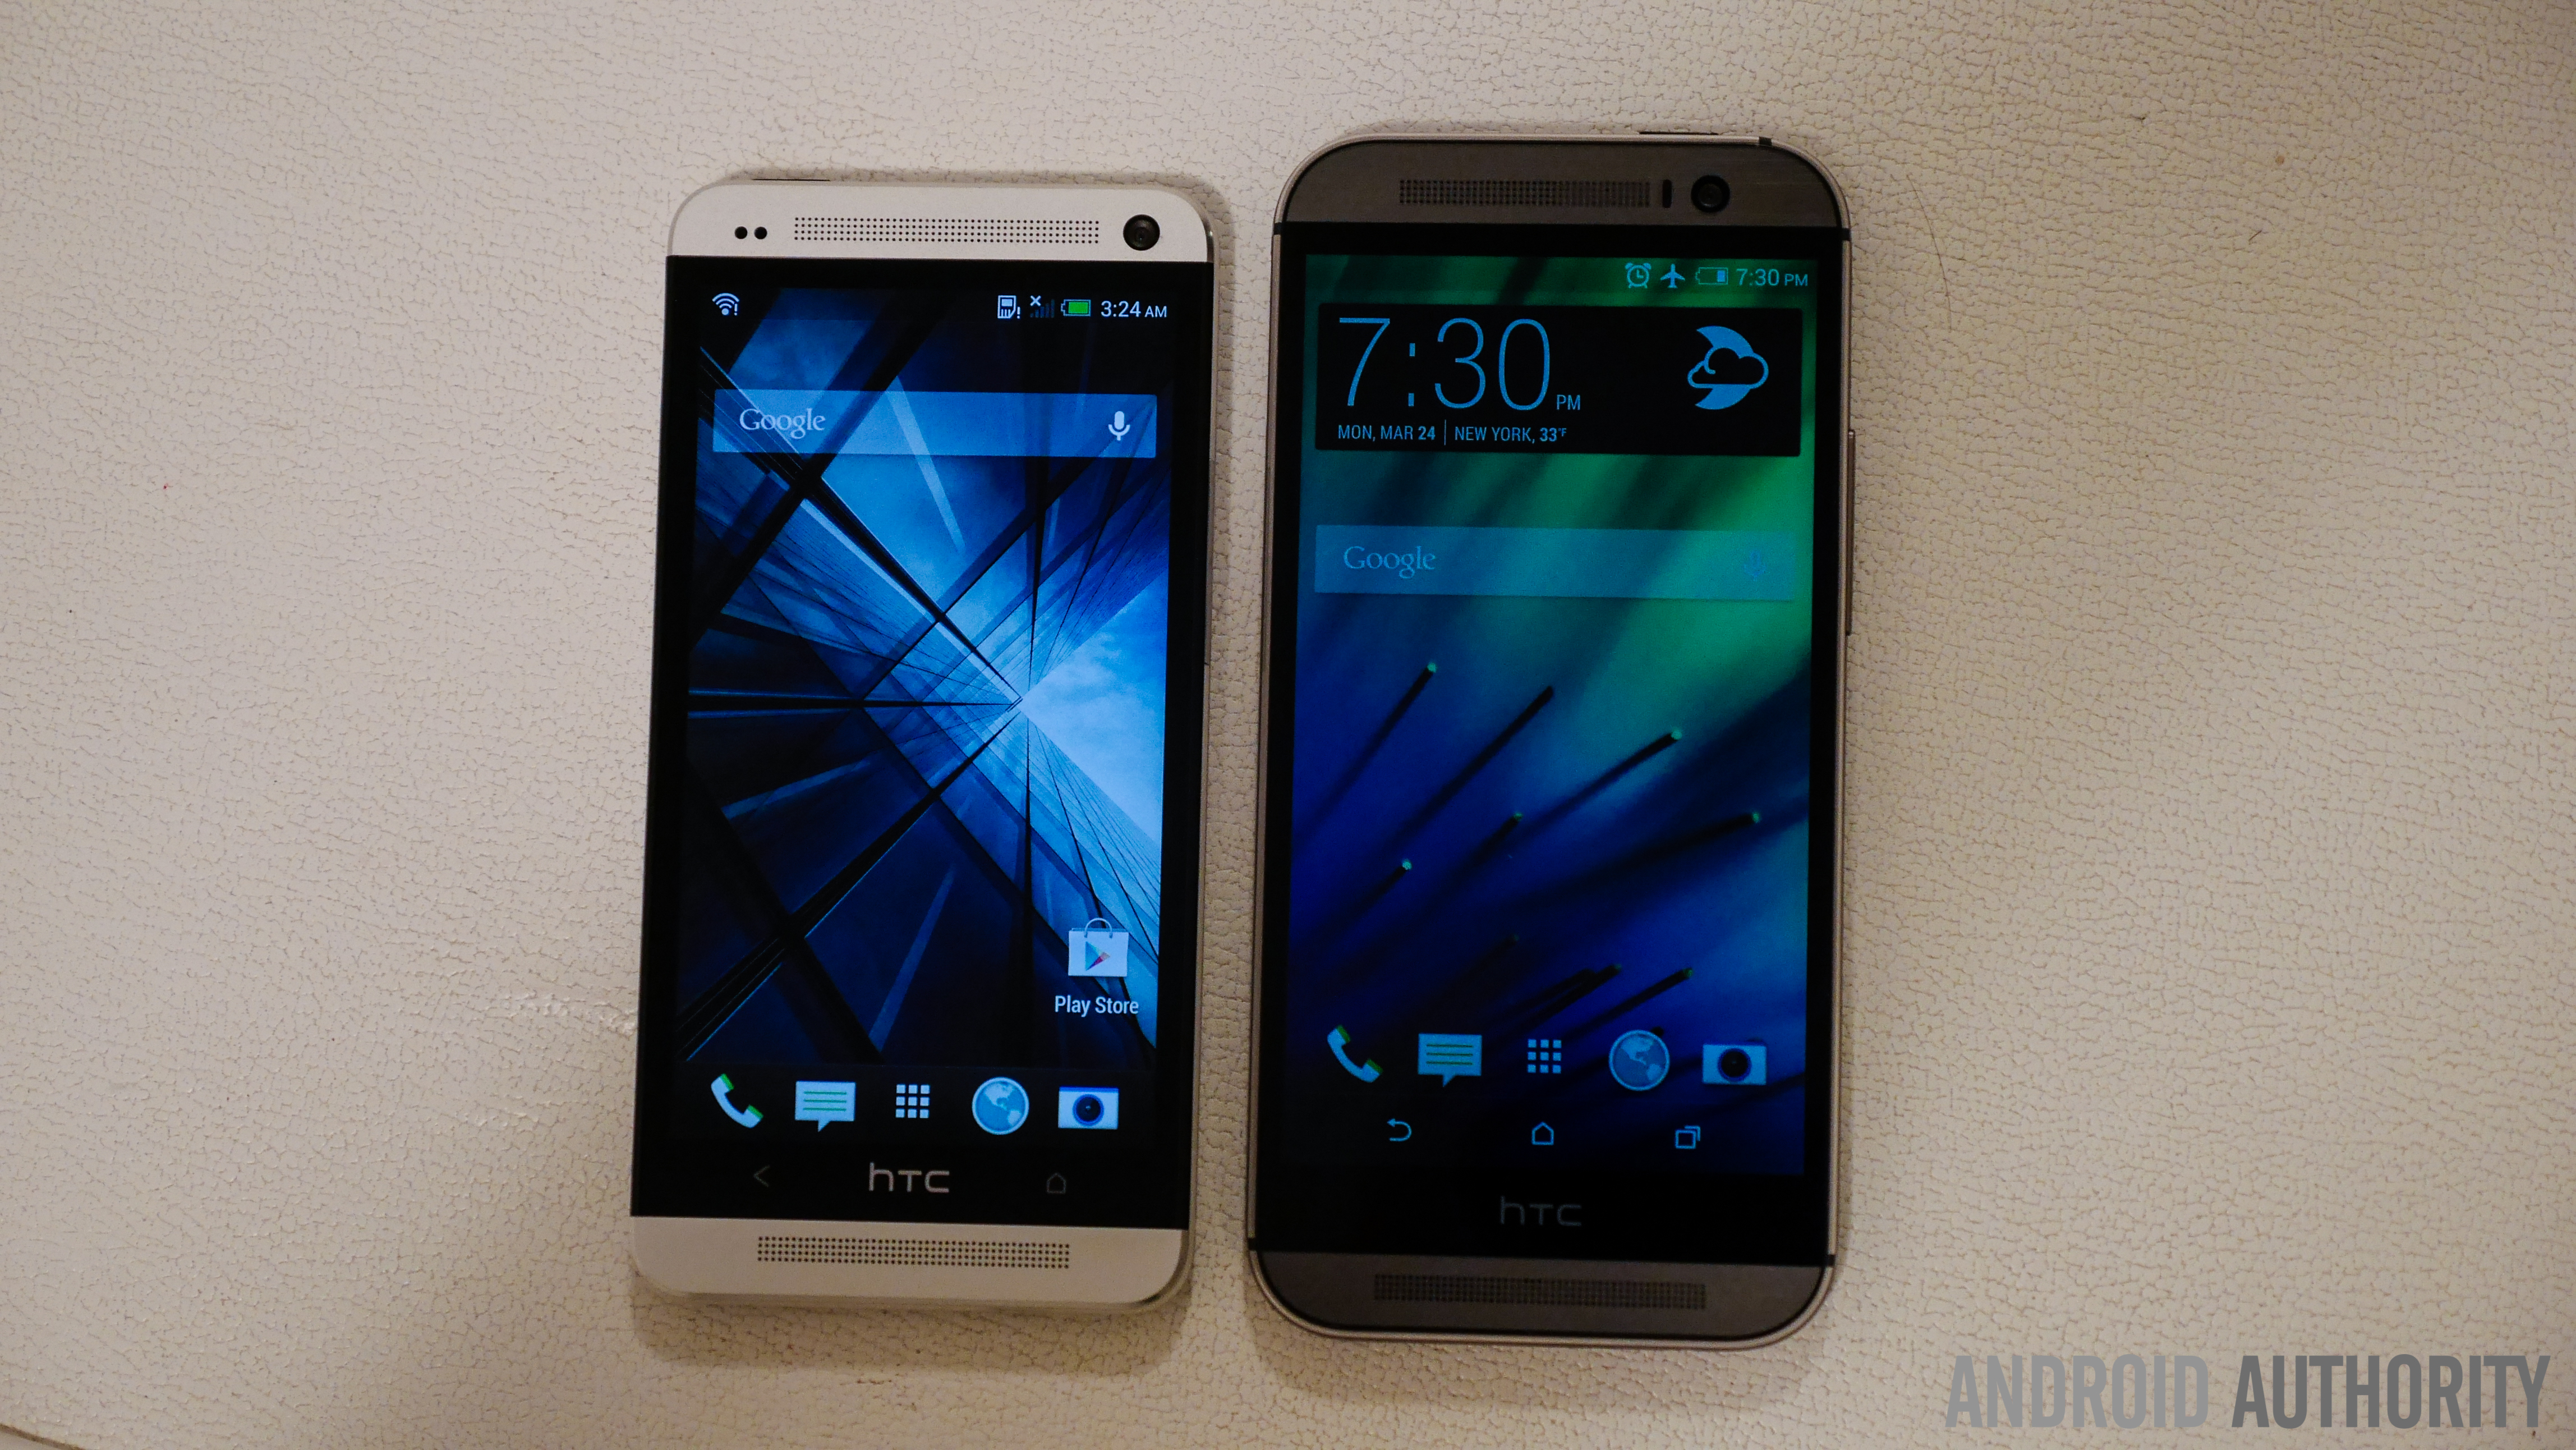 htc one m8 vs htc one m7 quick look aa (10 of 19)